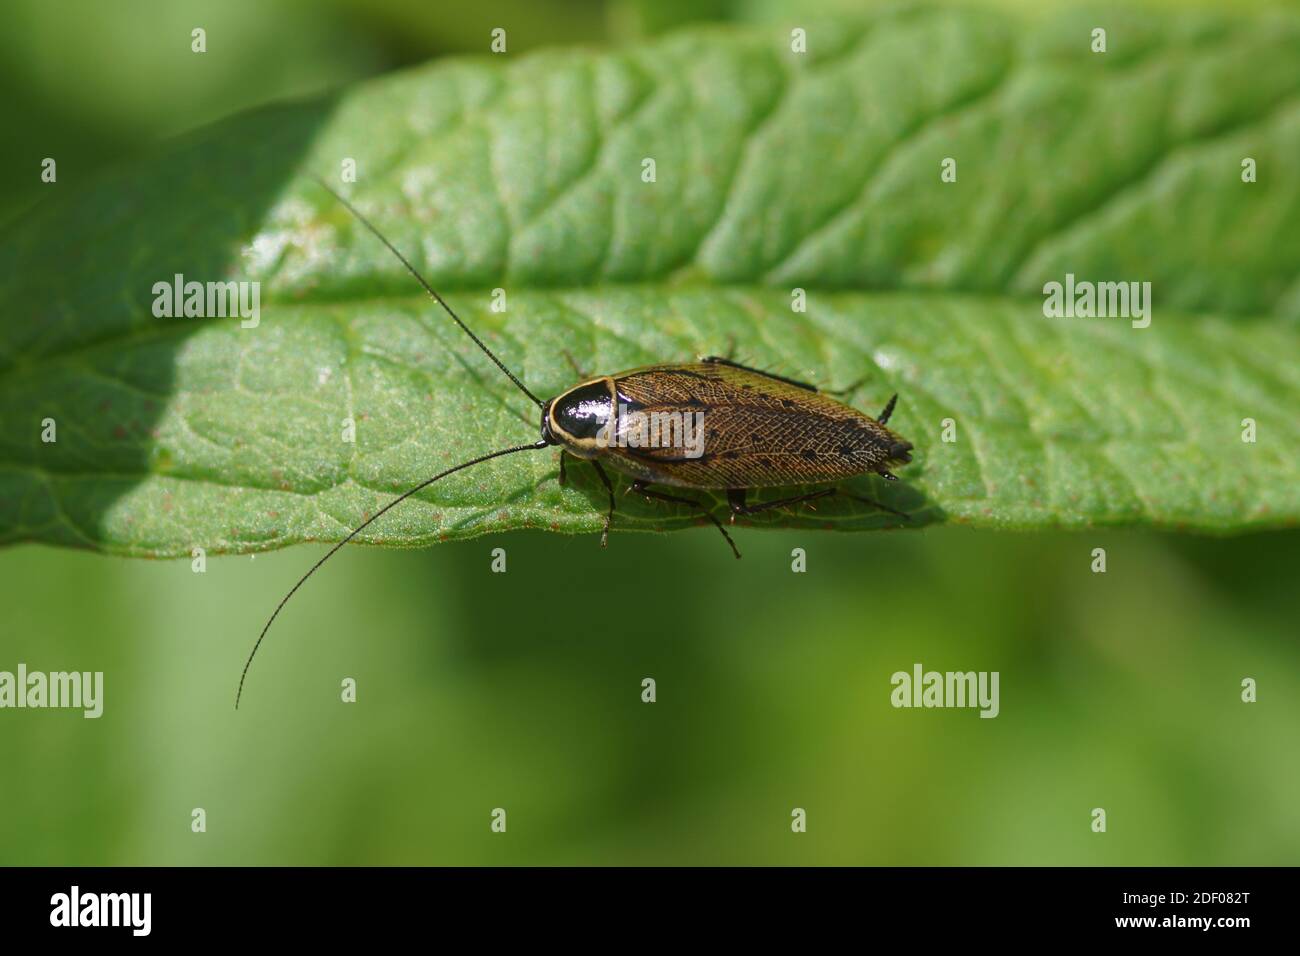 Male forest cockroach, lesser cockroach (Ectobius sylvestris) on a leaf. A cockroach in the family Ectobiidae. Netherlands, summer, June Stock Photo